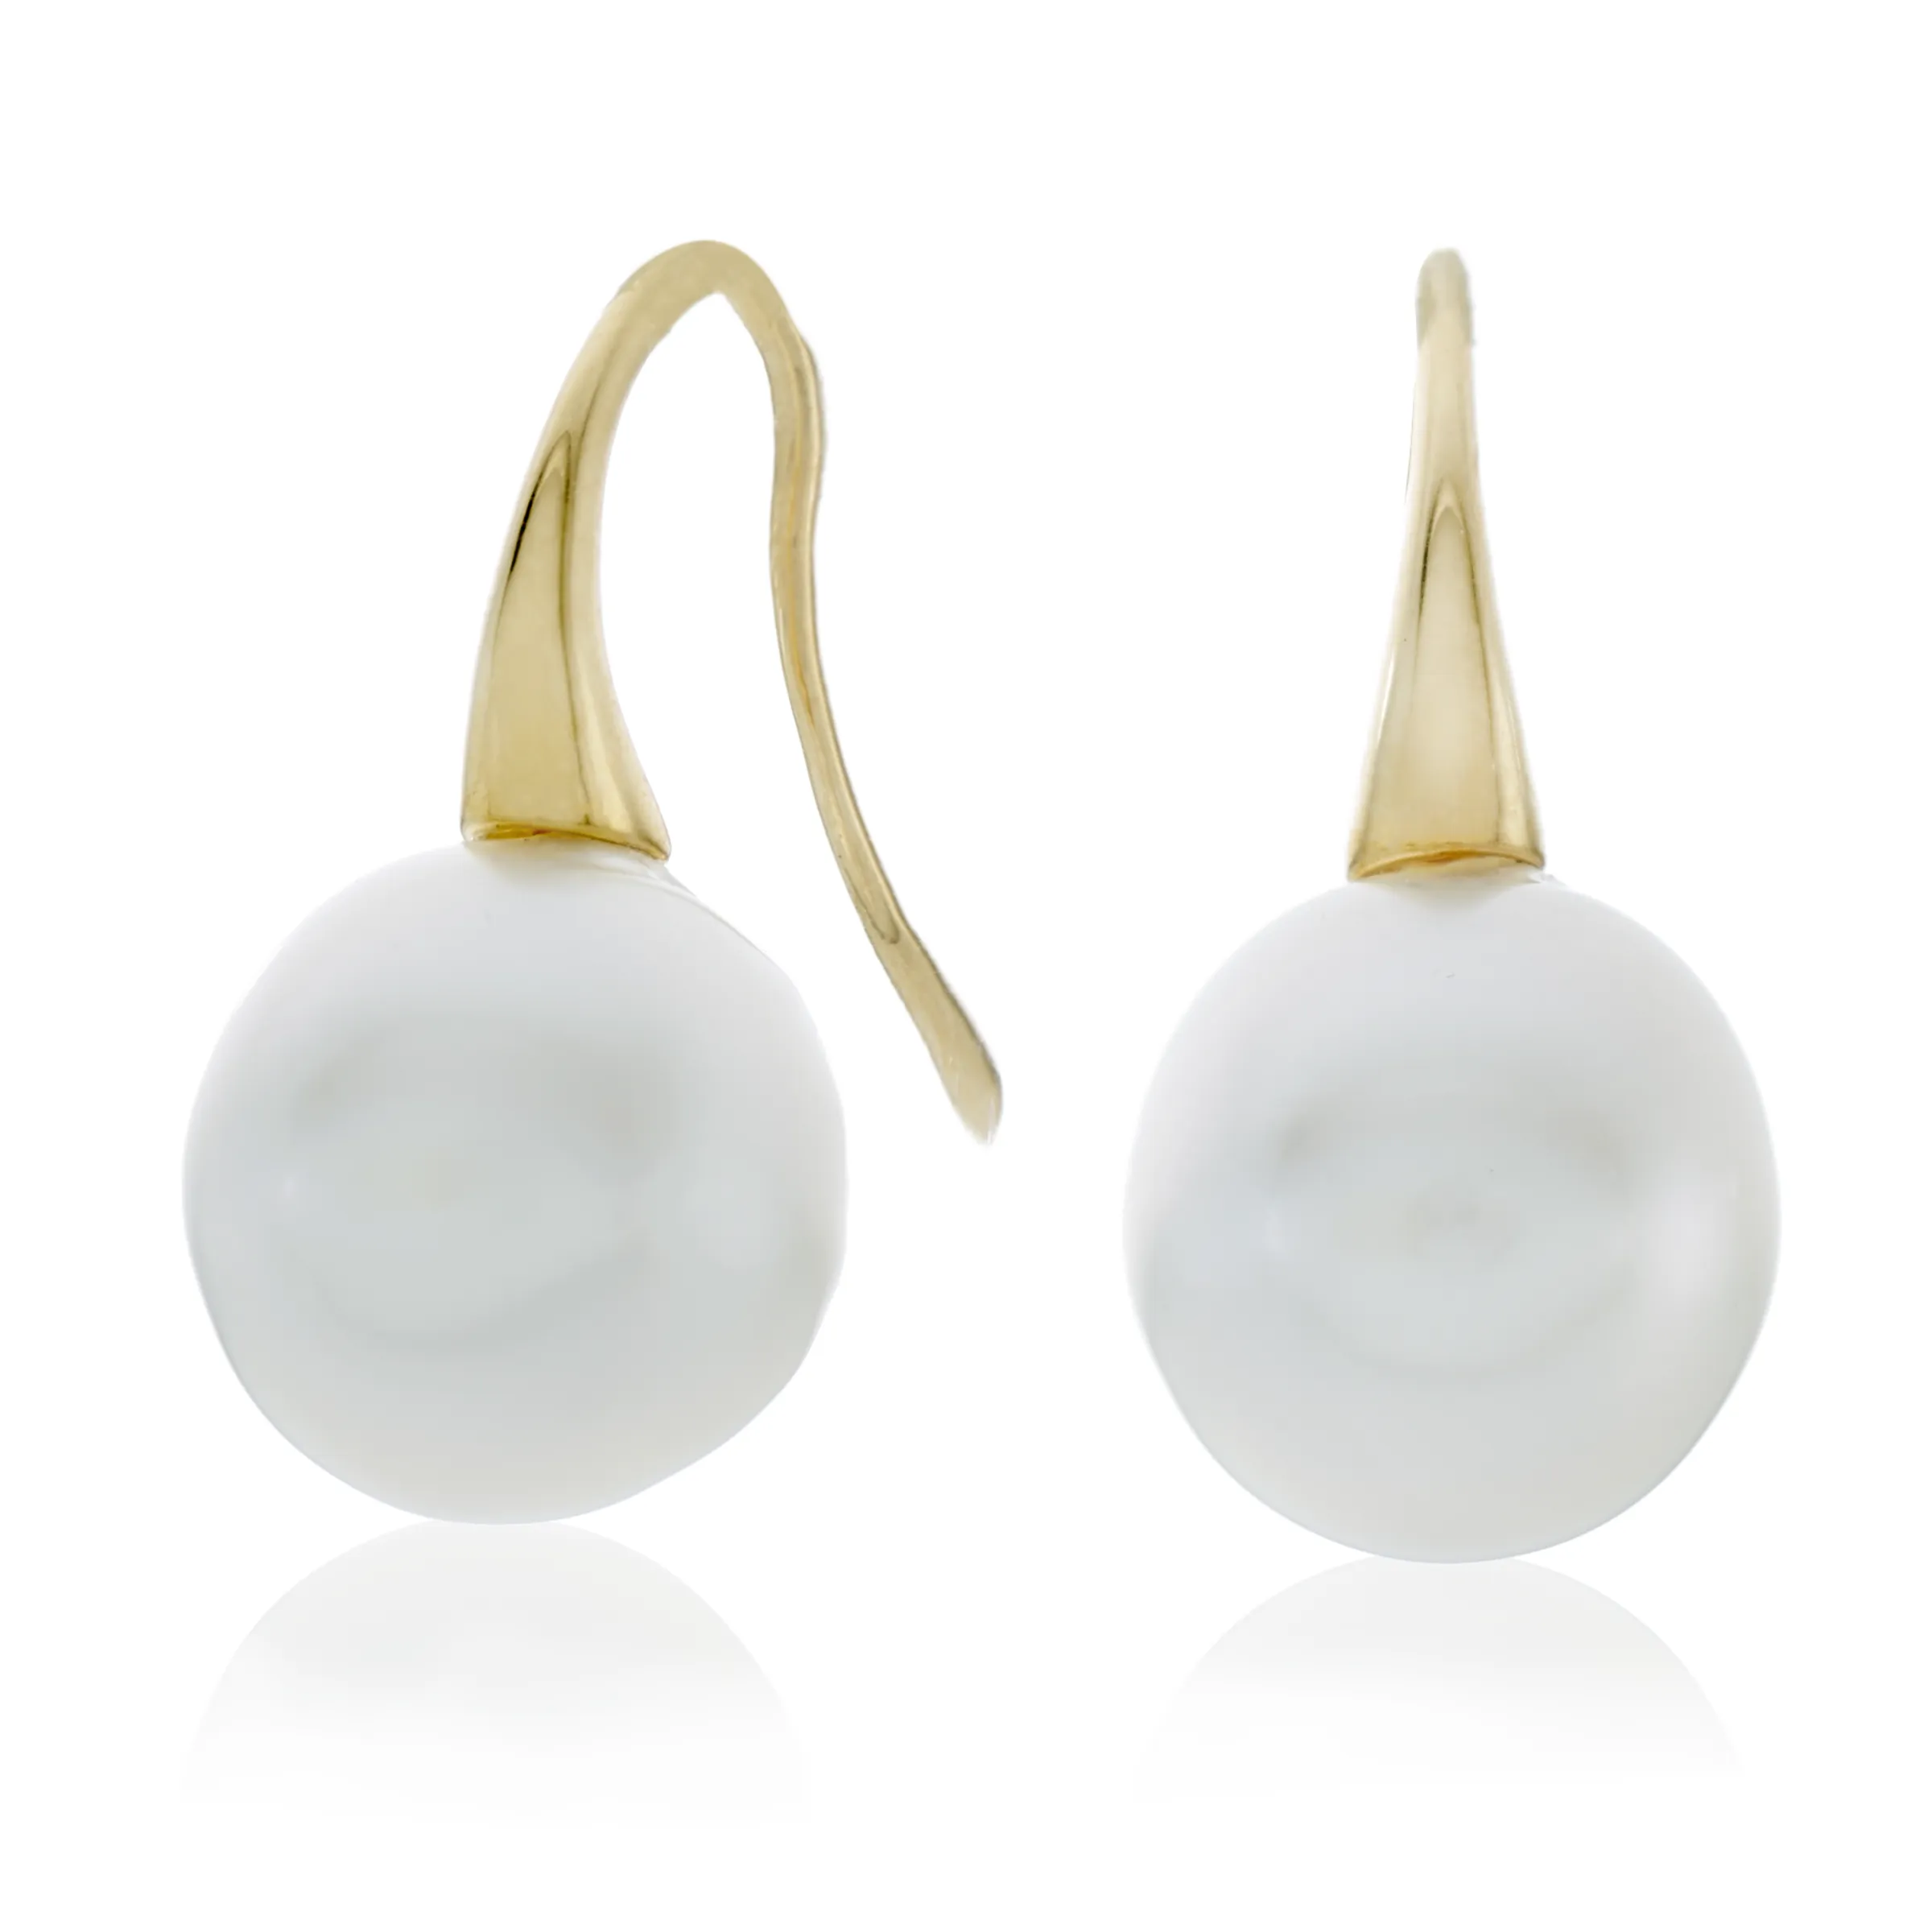 Gold Pearls - Golden South Sea Pearls